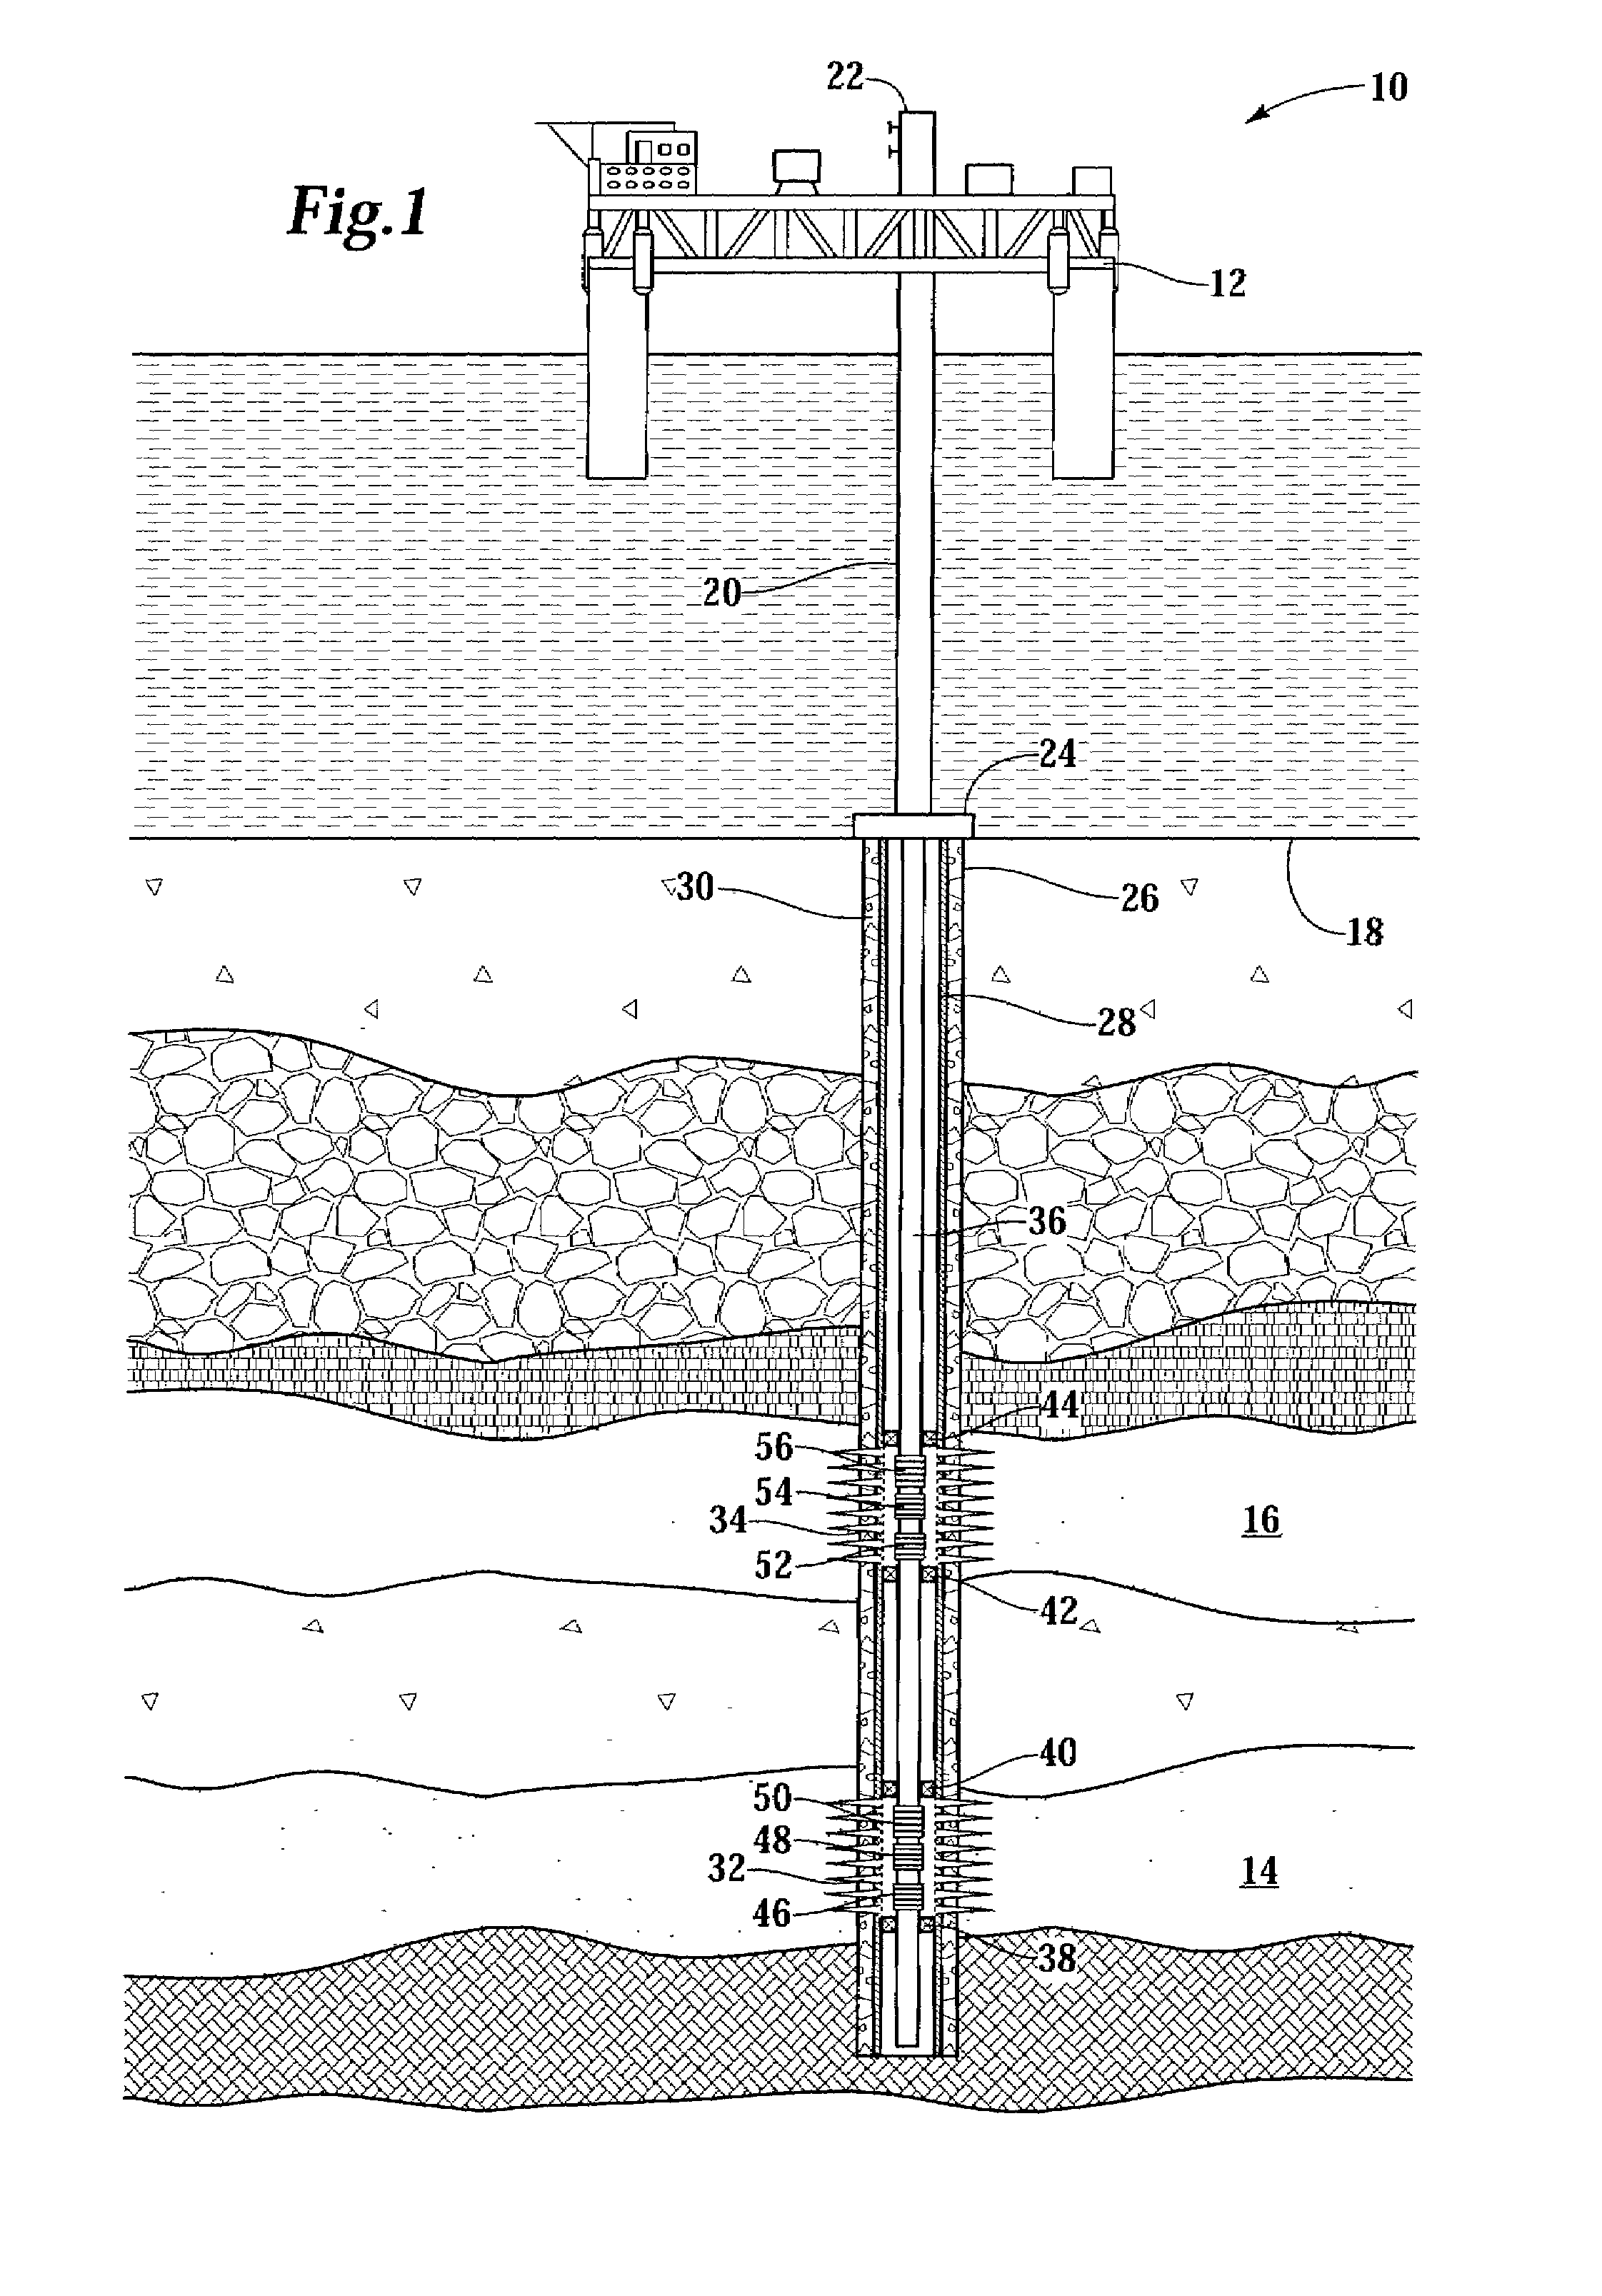 Fluid flow control device and method for use of same